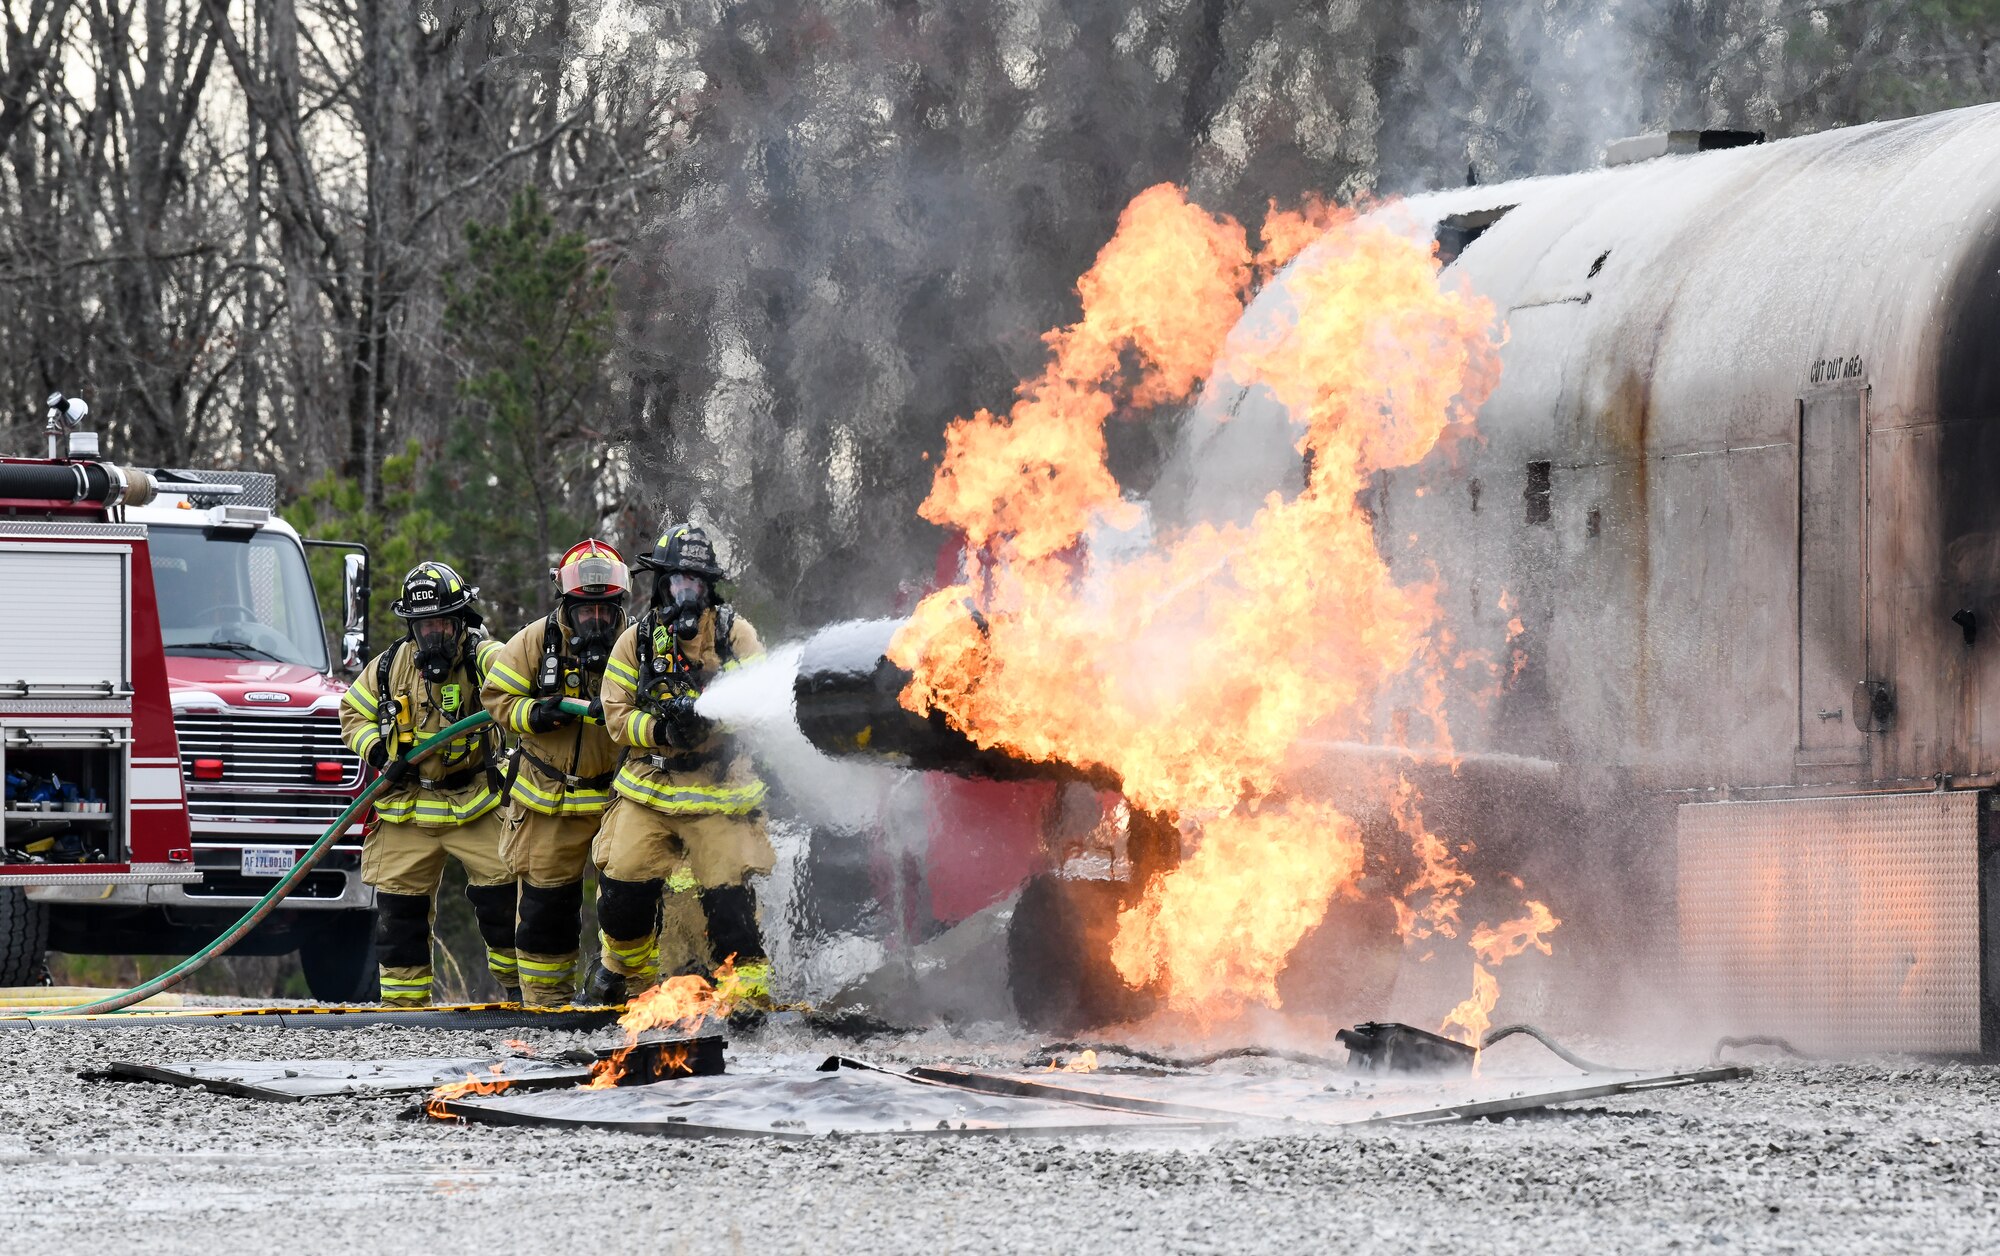 Arnold Air Force Base Fire and Emergency Services personnel attack an aircraft engine fire with a hand line while training, March 5, 2020, using a propane-fueled trainer brought to the base. The simulator, which was brought in to facilitate training, uses liquid and vapor propane to create controlled and repeatable fire scenarios. (U.S. Air Force photo by Jill Pickett)